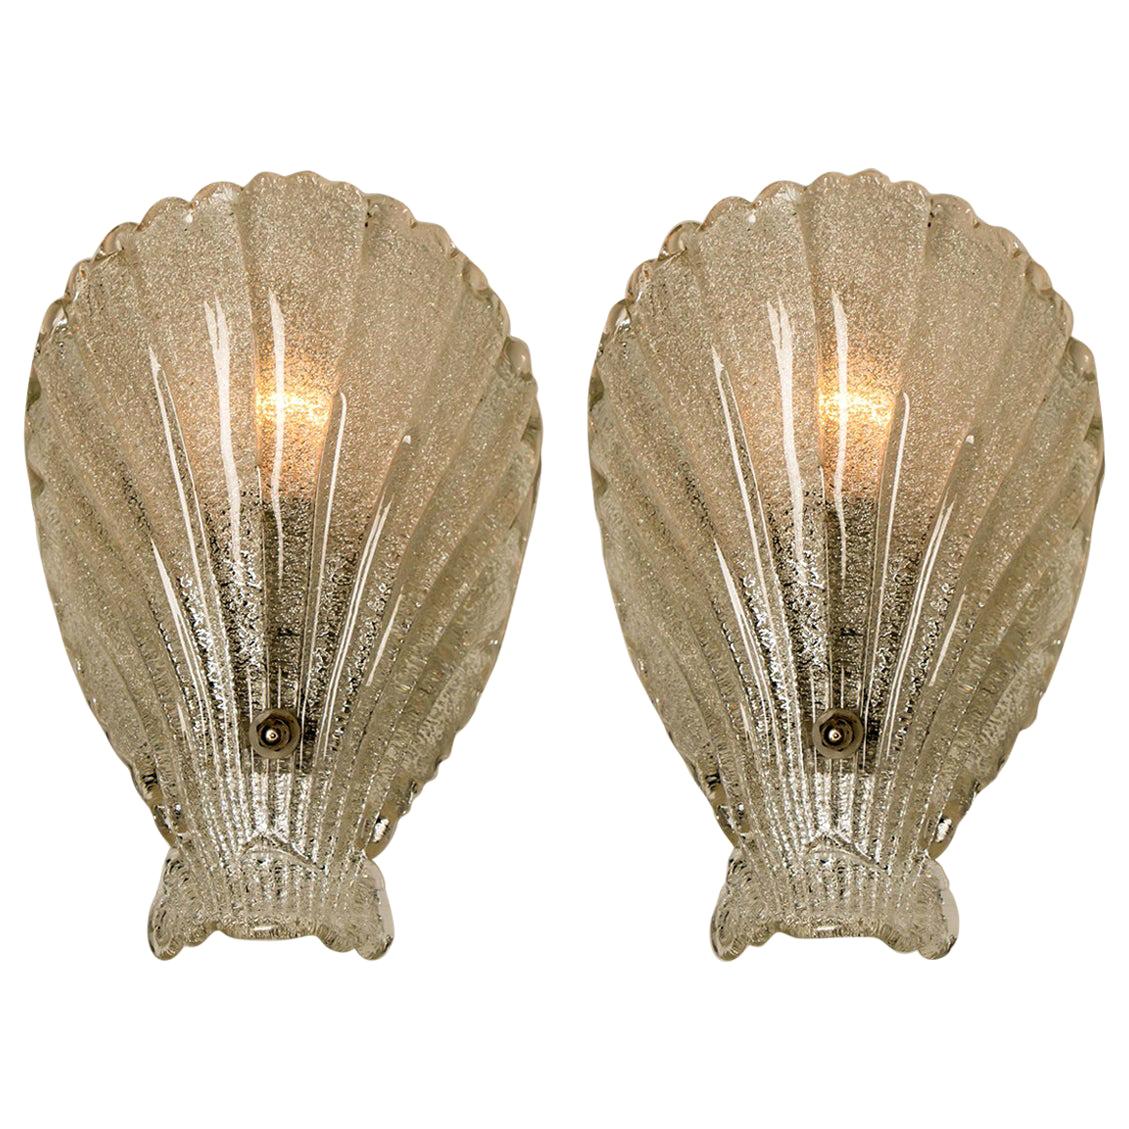 Pair of Murano Hand Blown Clear Glass Sea Shell Sconces, Italy, 1960